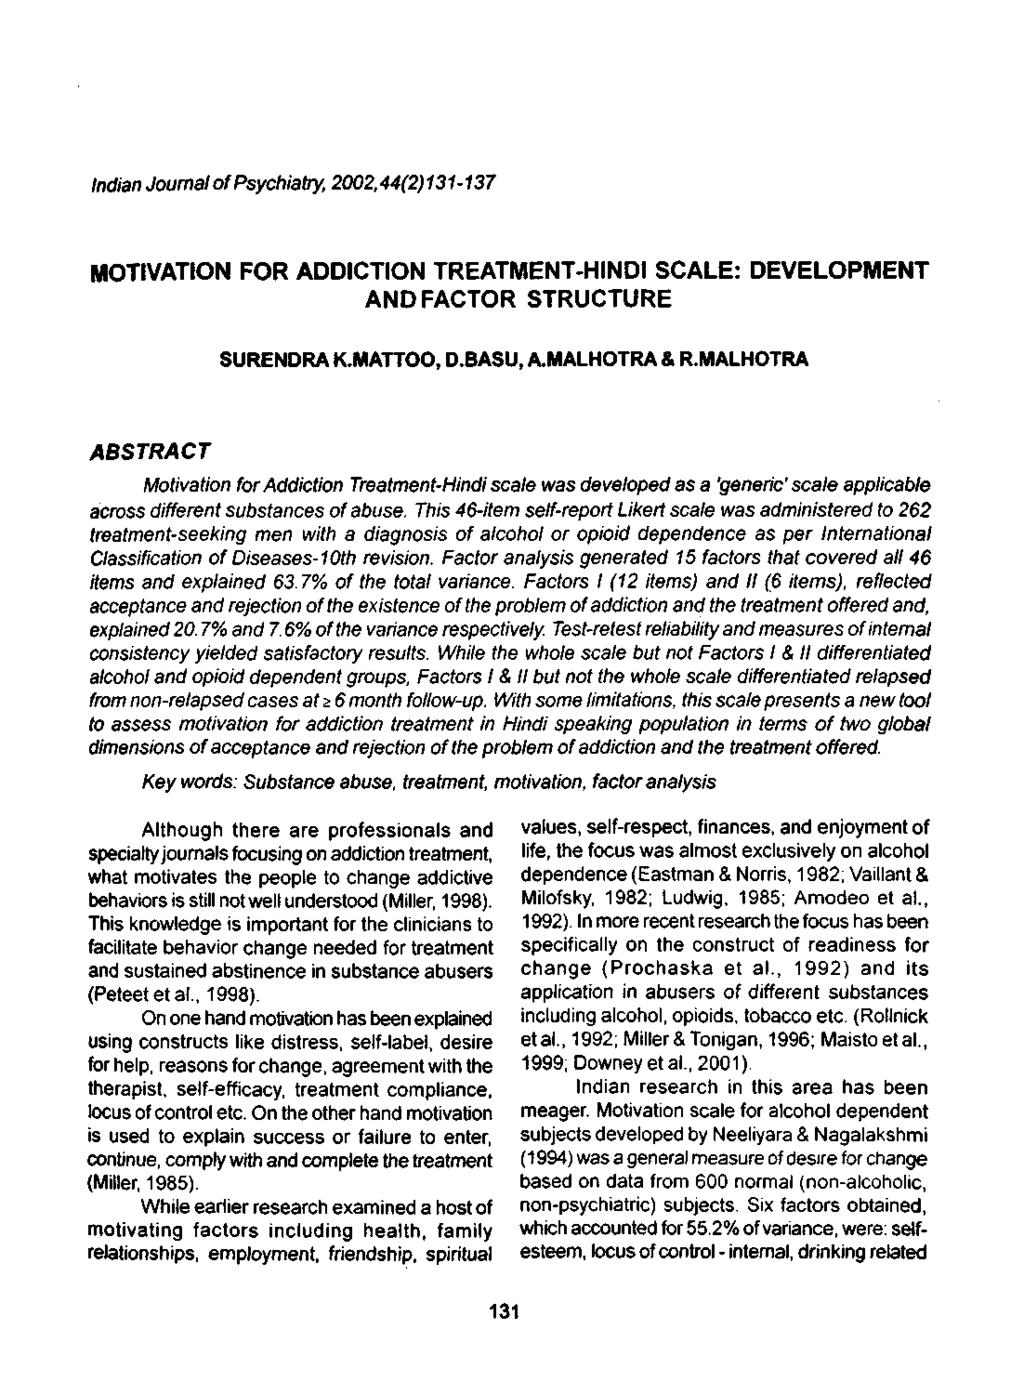 Indian Journal of Psychiatry, 2002,44(2)131-137 MOTIVATION FOR ADDICTION TREATMENT-HINDI SCALE: DEVELOPMENT AND FACTOR STRUCTURE SURENDRA K.MATTOO, D.BASU, A.MALHOTRA & R.